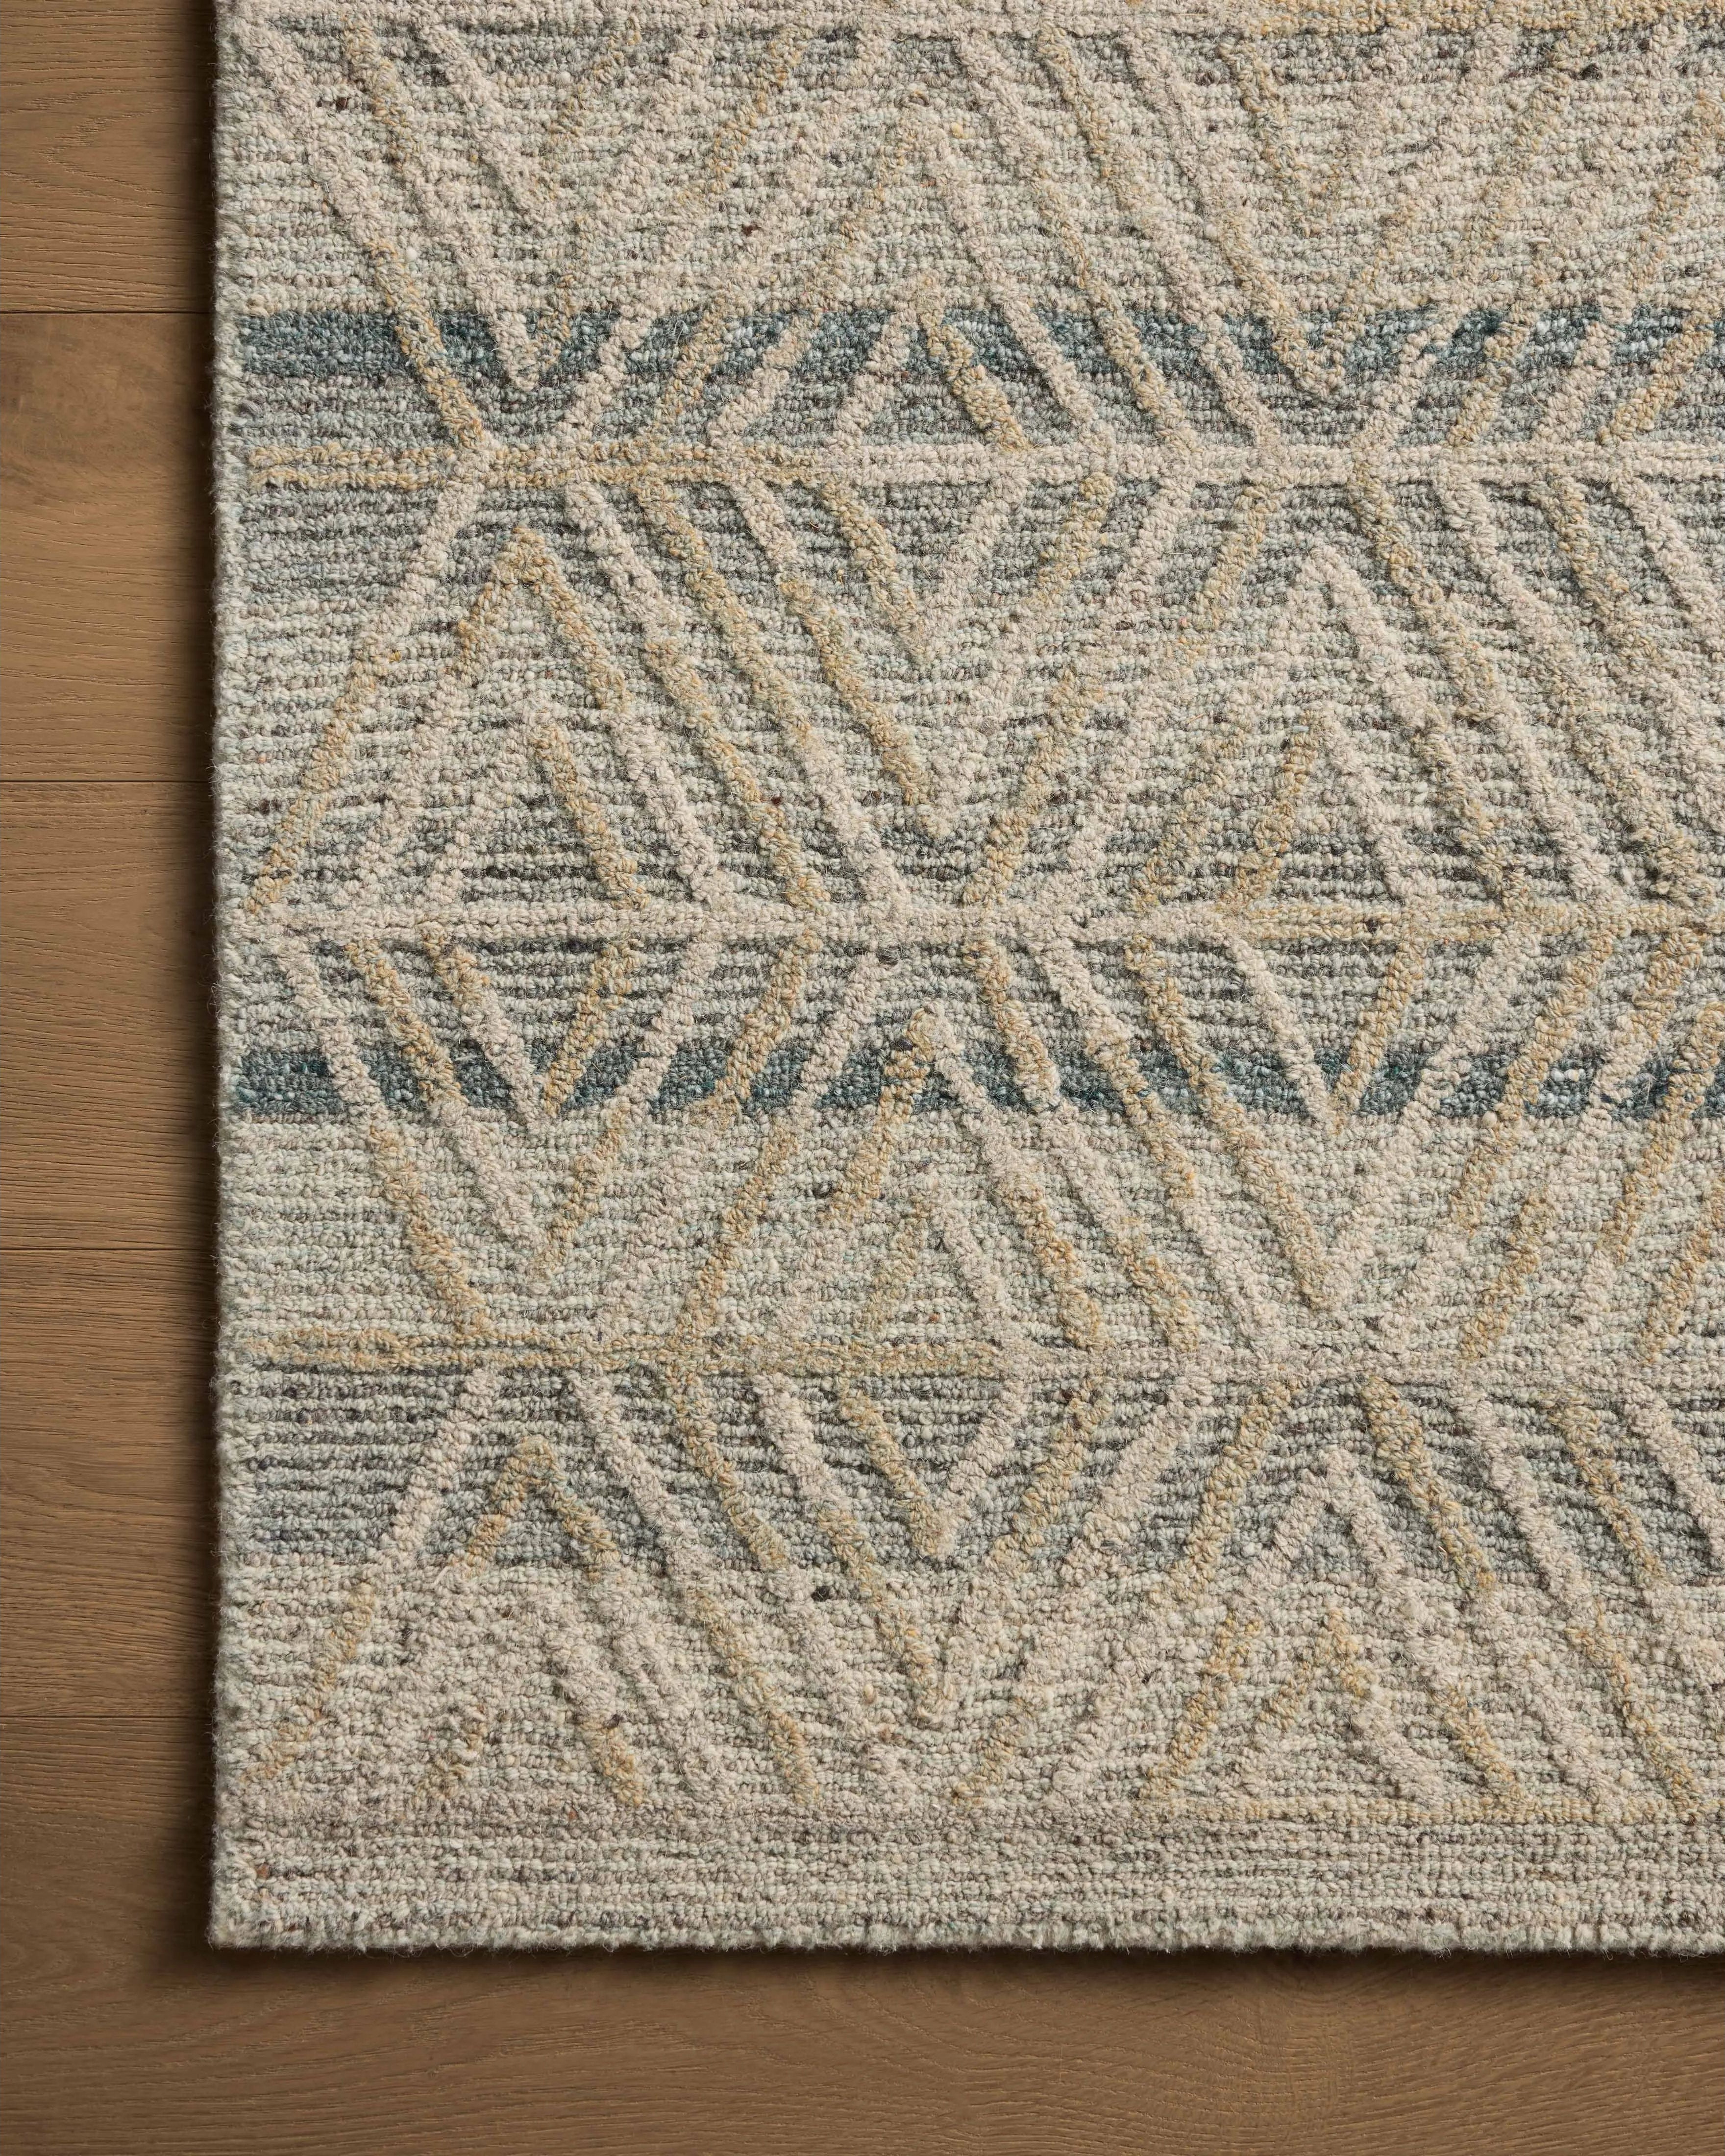 The Elias Fog / Natural Rug is a hand-tufted wool area rug with lively graphic patterns in earth and stone tones. There’s a unique texture to the rug made by over-tufting, in which a design is hand-tufted over a tufted base, creating a subtle high-low pile. Amethyst Home provides interior design, new home construction design consulting, vintage area rugs, and lighting in the Charlotte metro area.